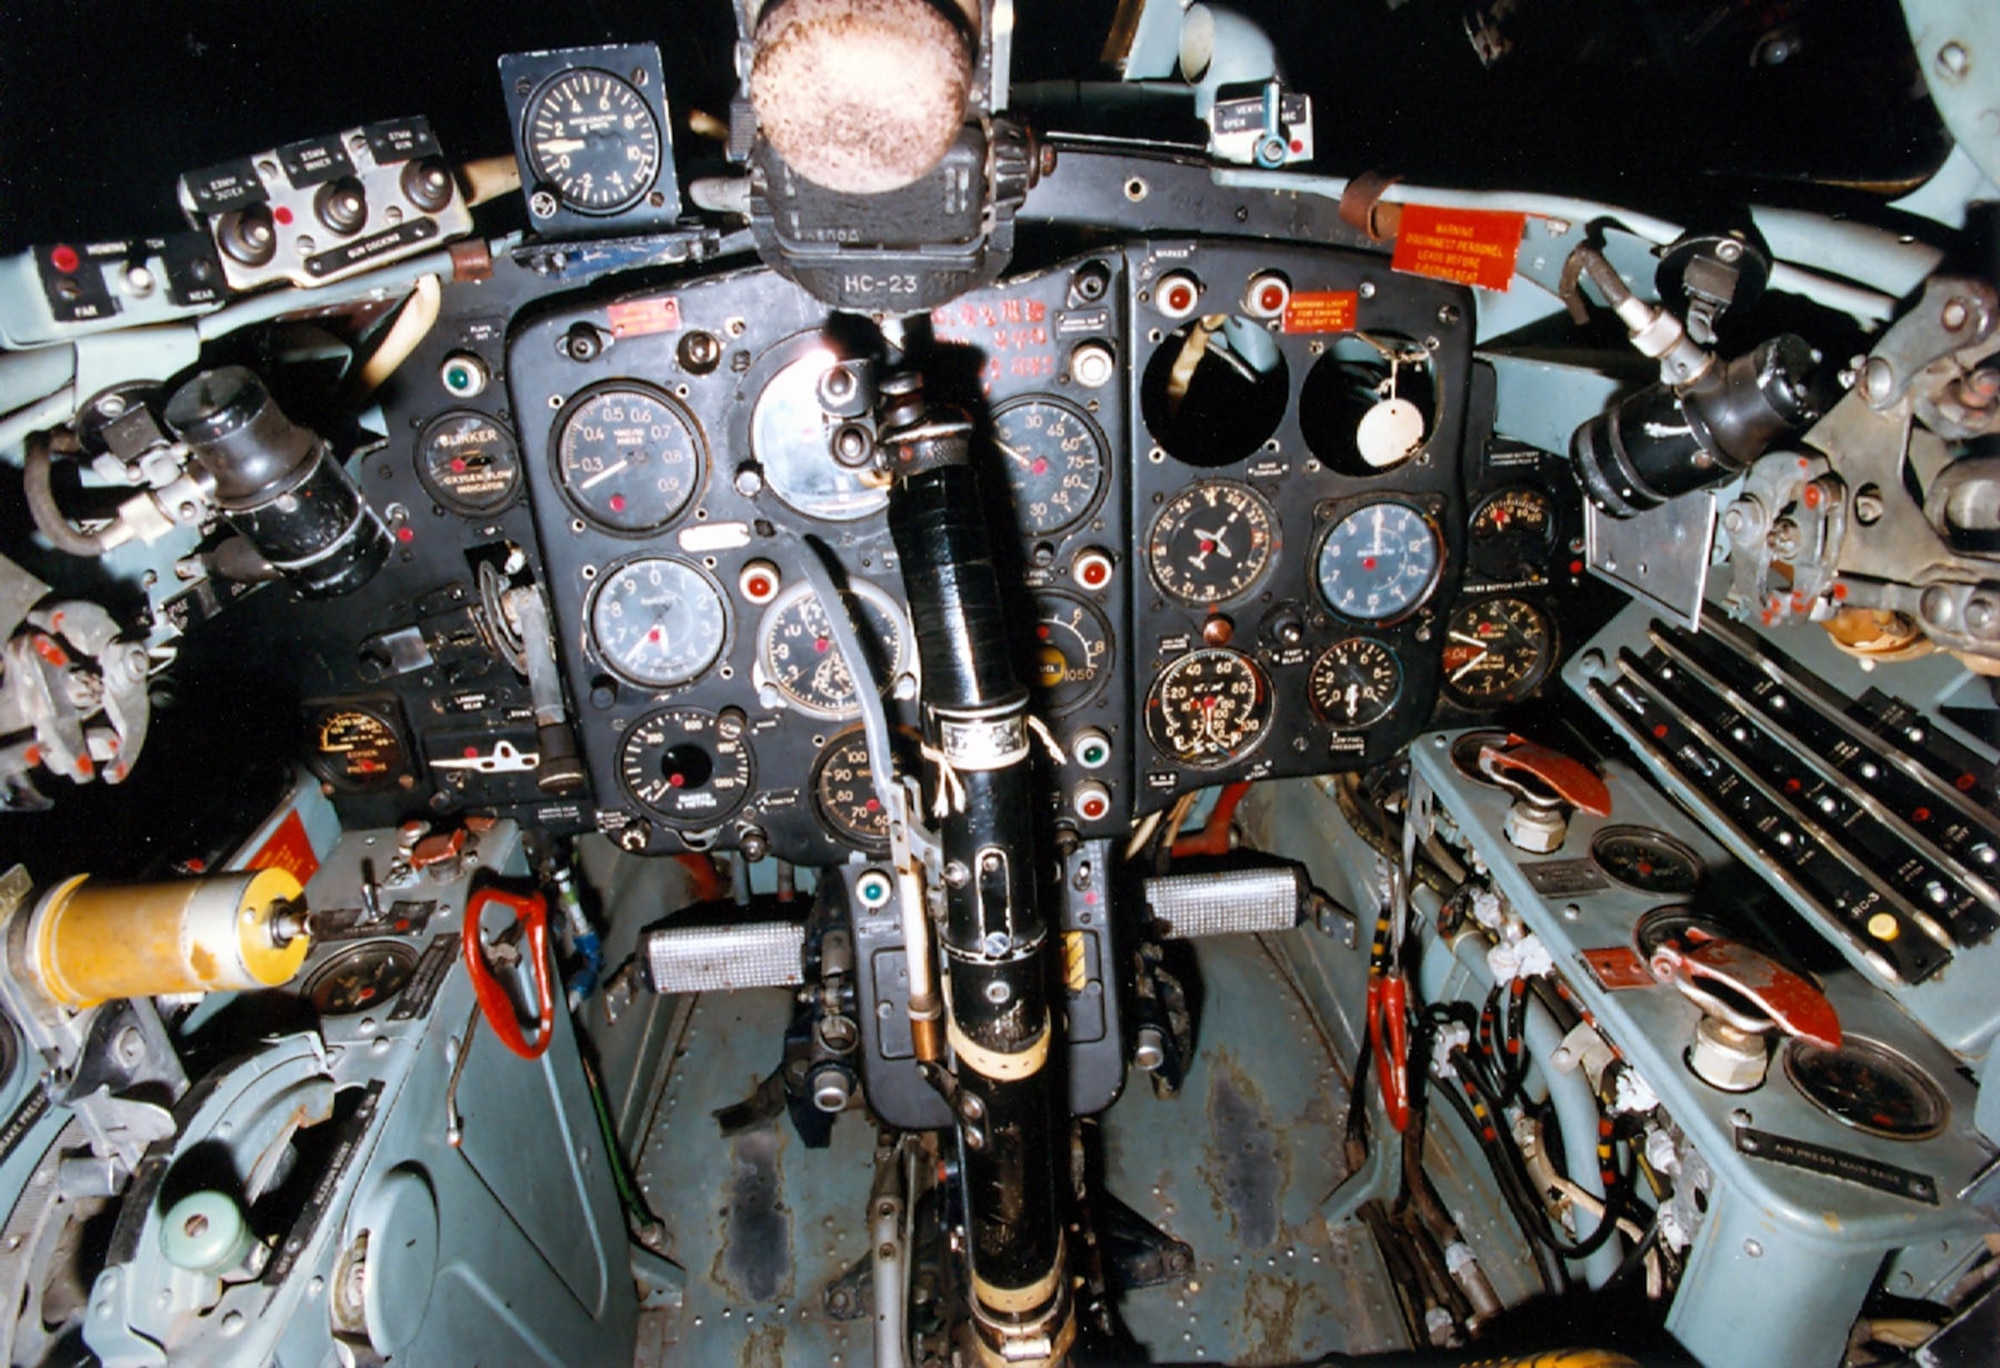 DAYTON, Ohio -- Mikoyan-Gurevich MiG-15 cockpit at the National Museum of the United States Air Force. (U.S. Air Force photo)